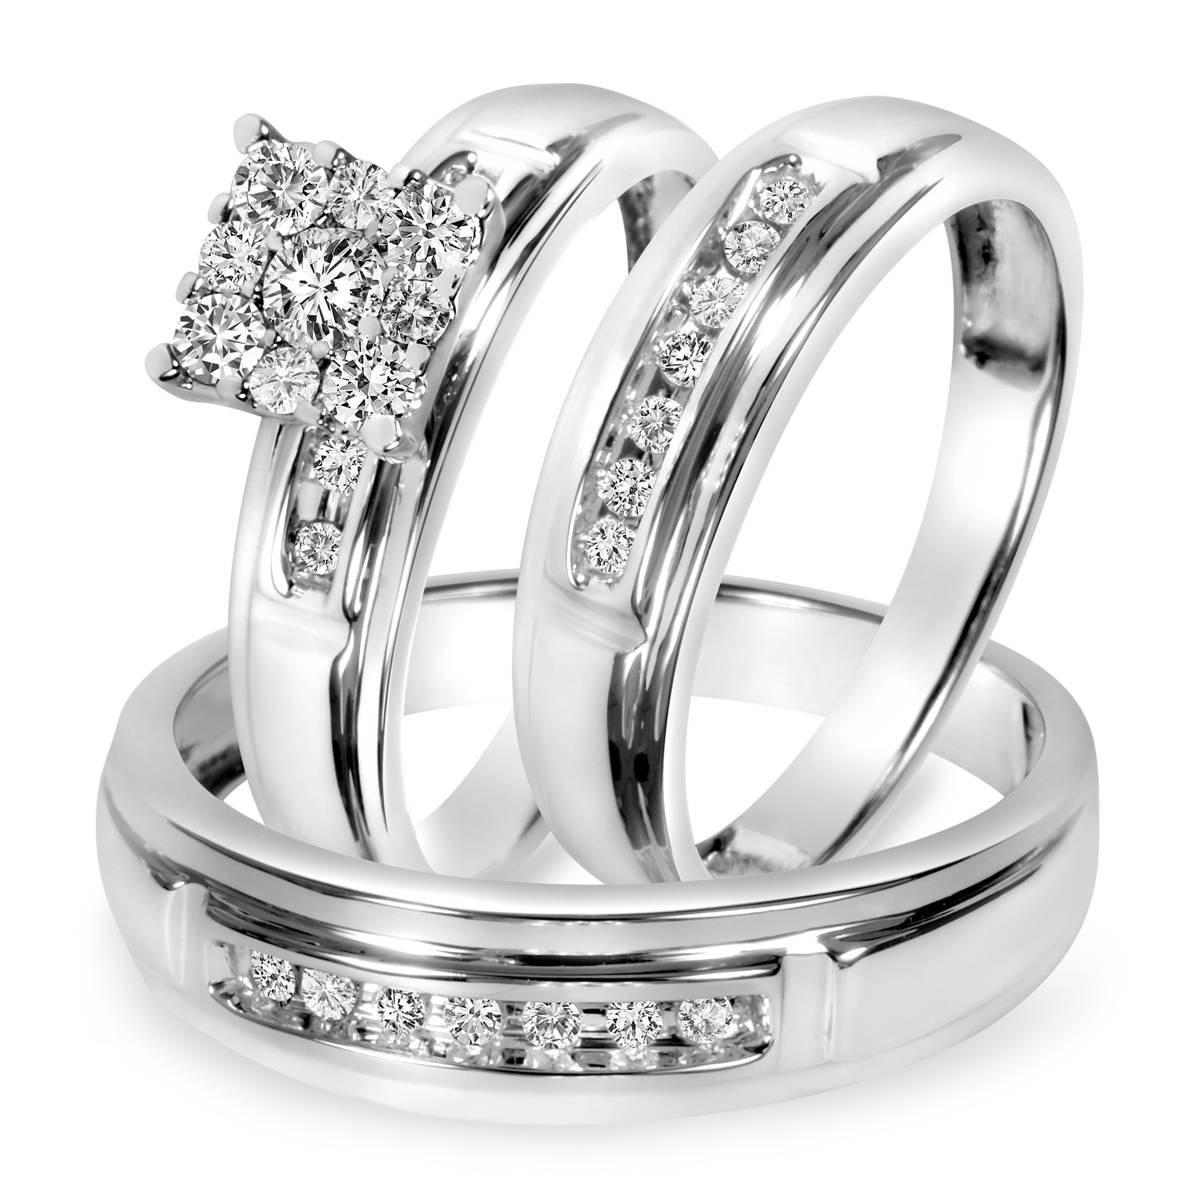 His And Her Wedding Bands Sets Cheap
 15 Inspirations of Cheap Wedding Bands Sets His And Hers